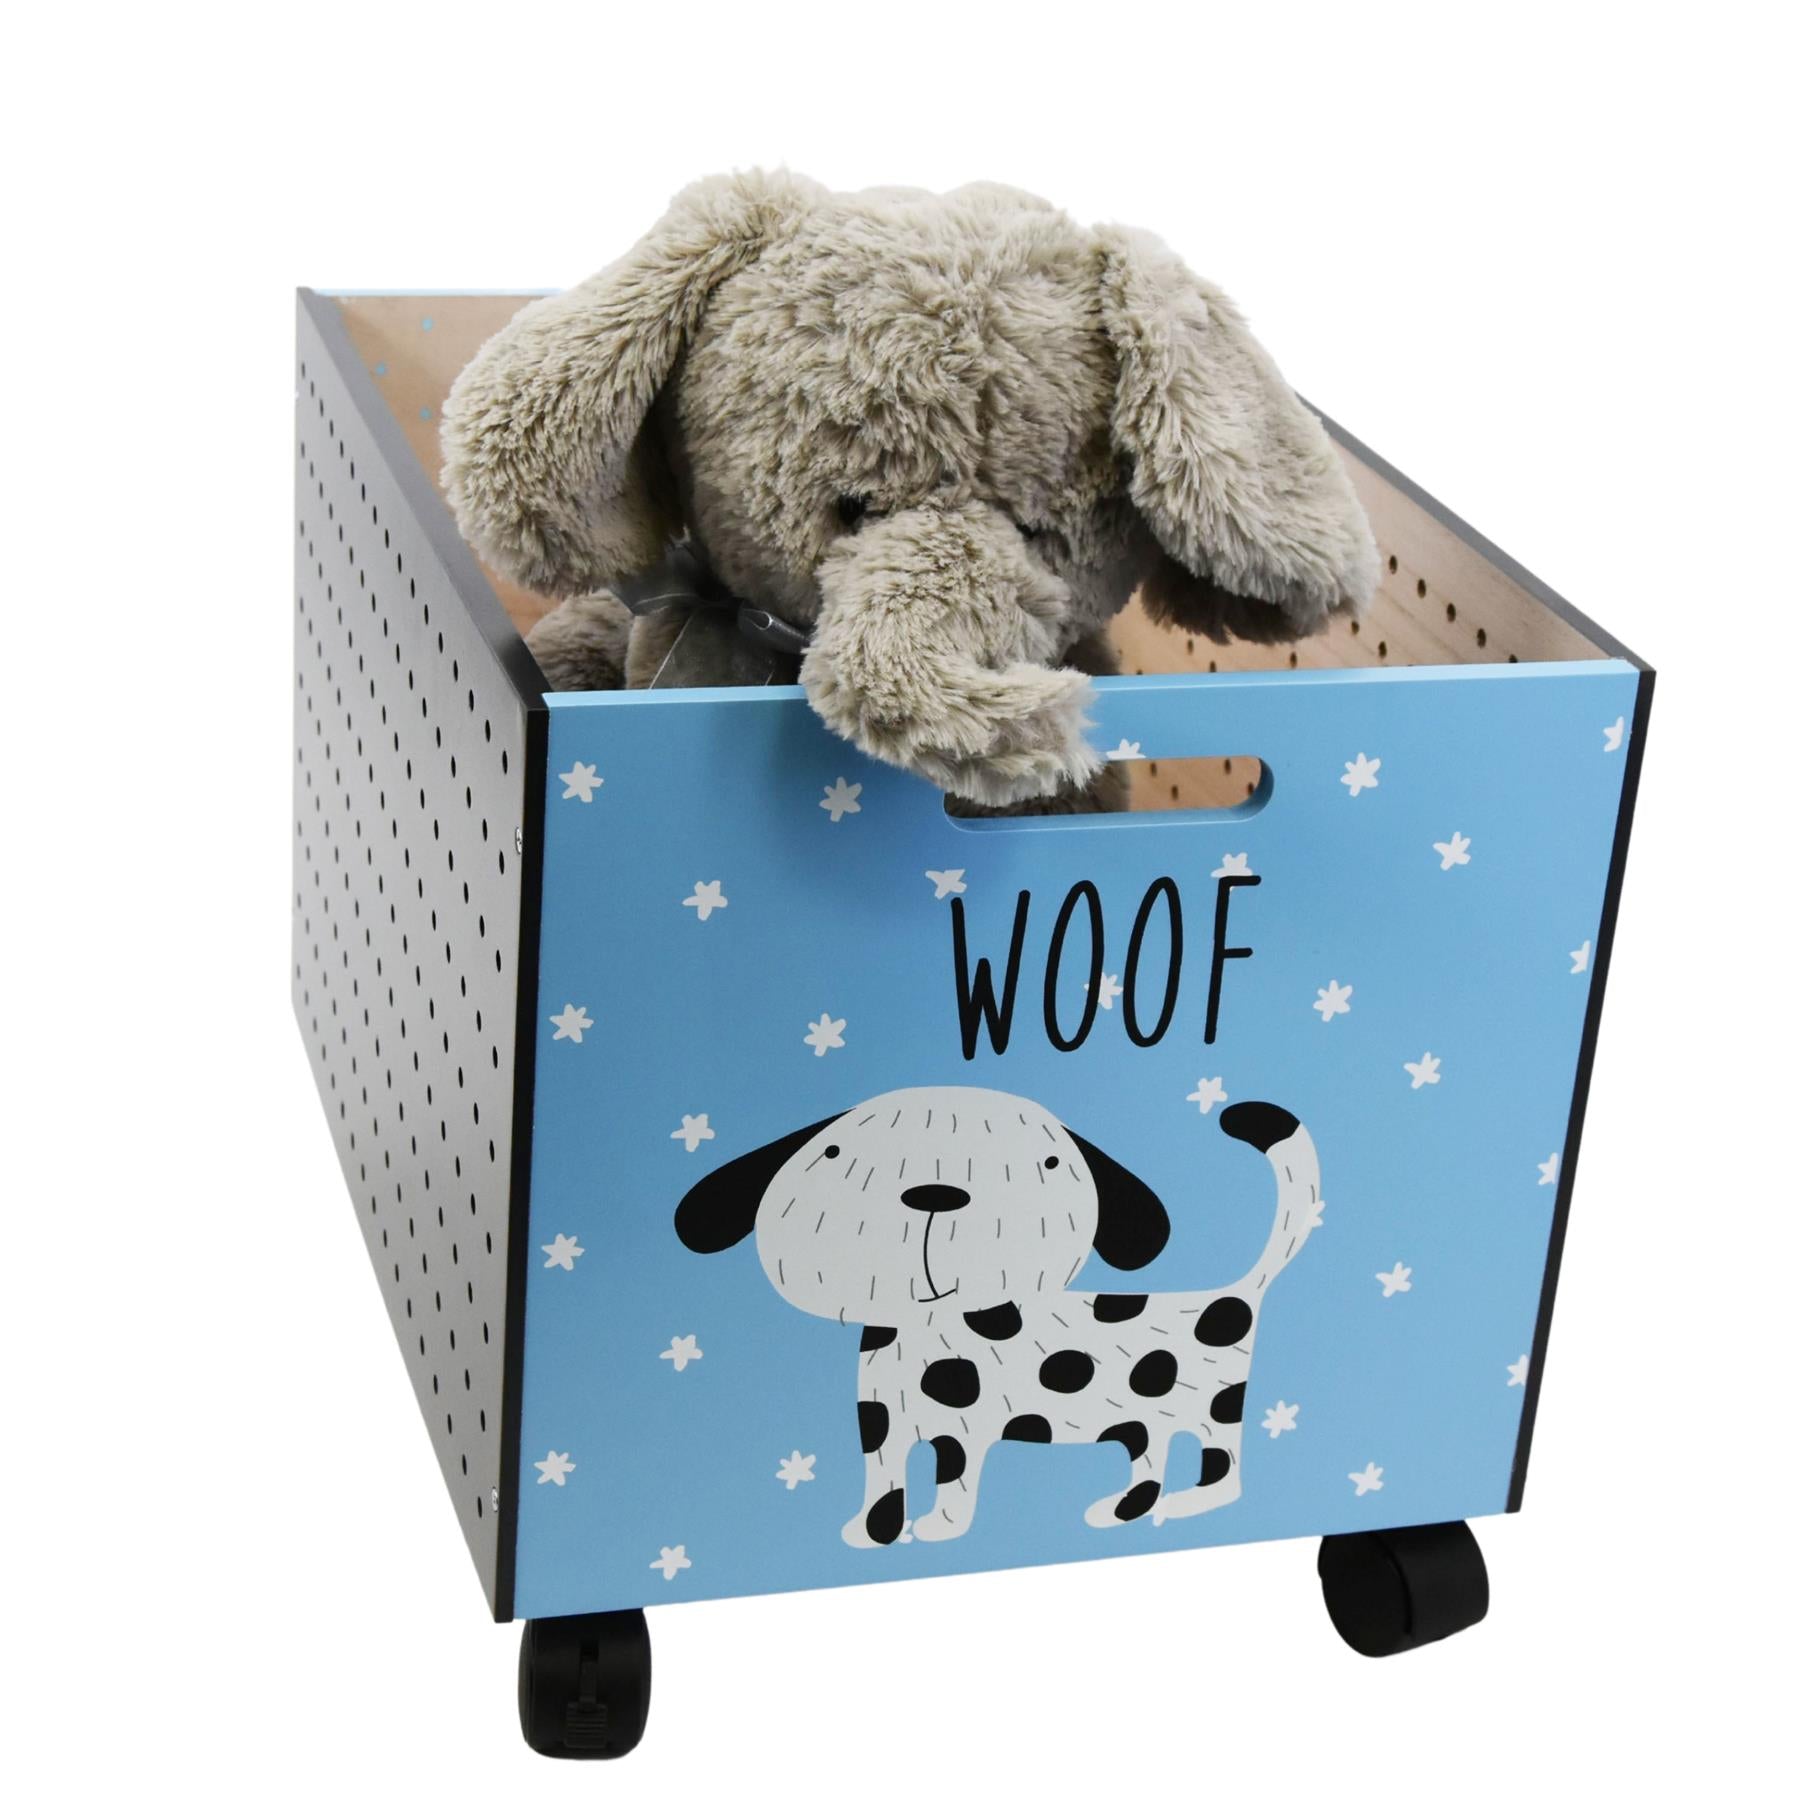 Kids Wooden Dog Design Storage Chest On Wheels The Magic Toy Shop - The Magic Toy Shop